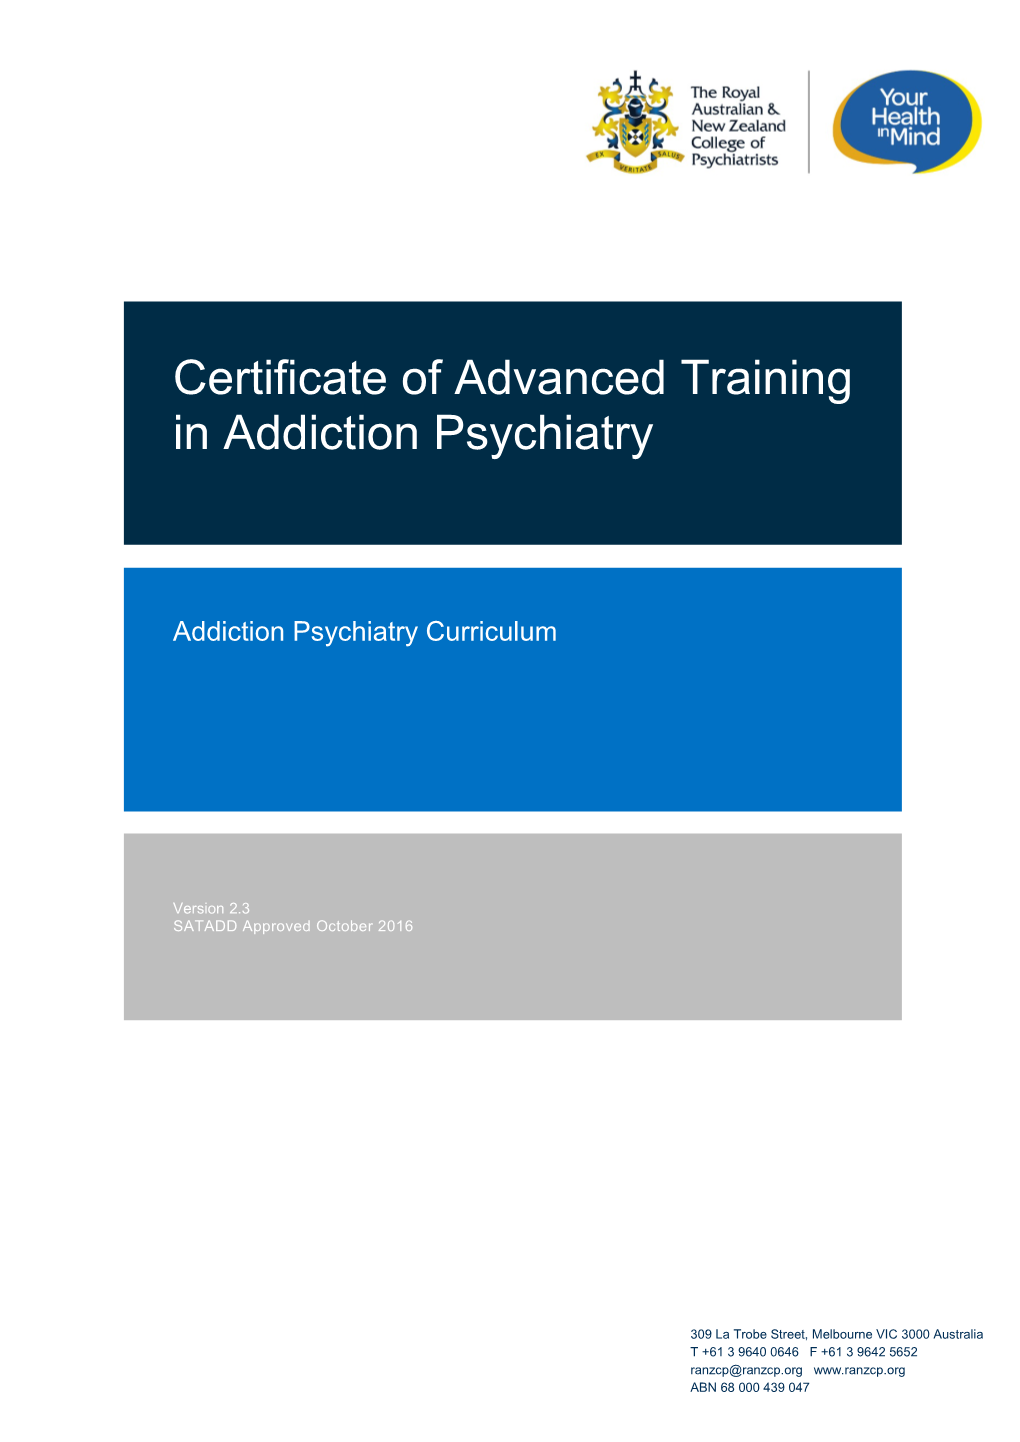 Certificate of Advanced Training in Addiction Psychiatry